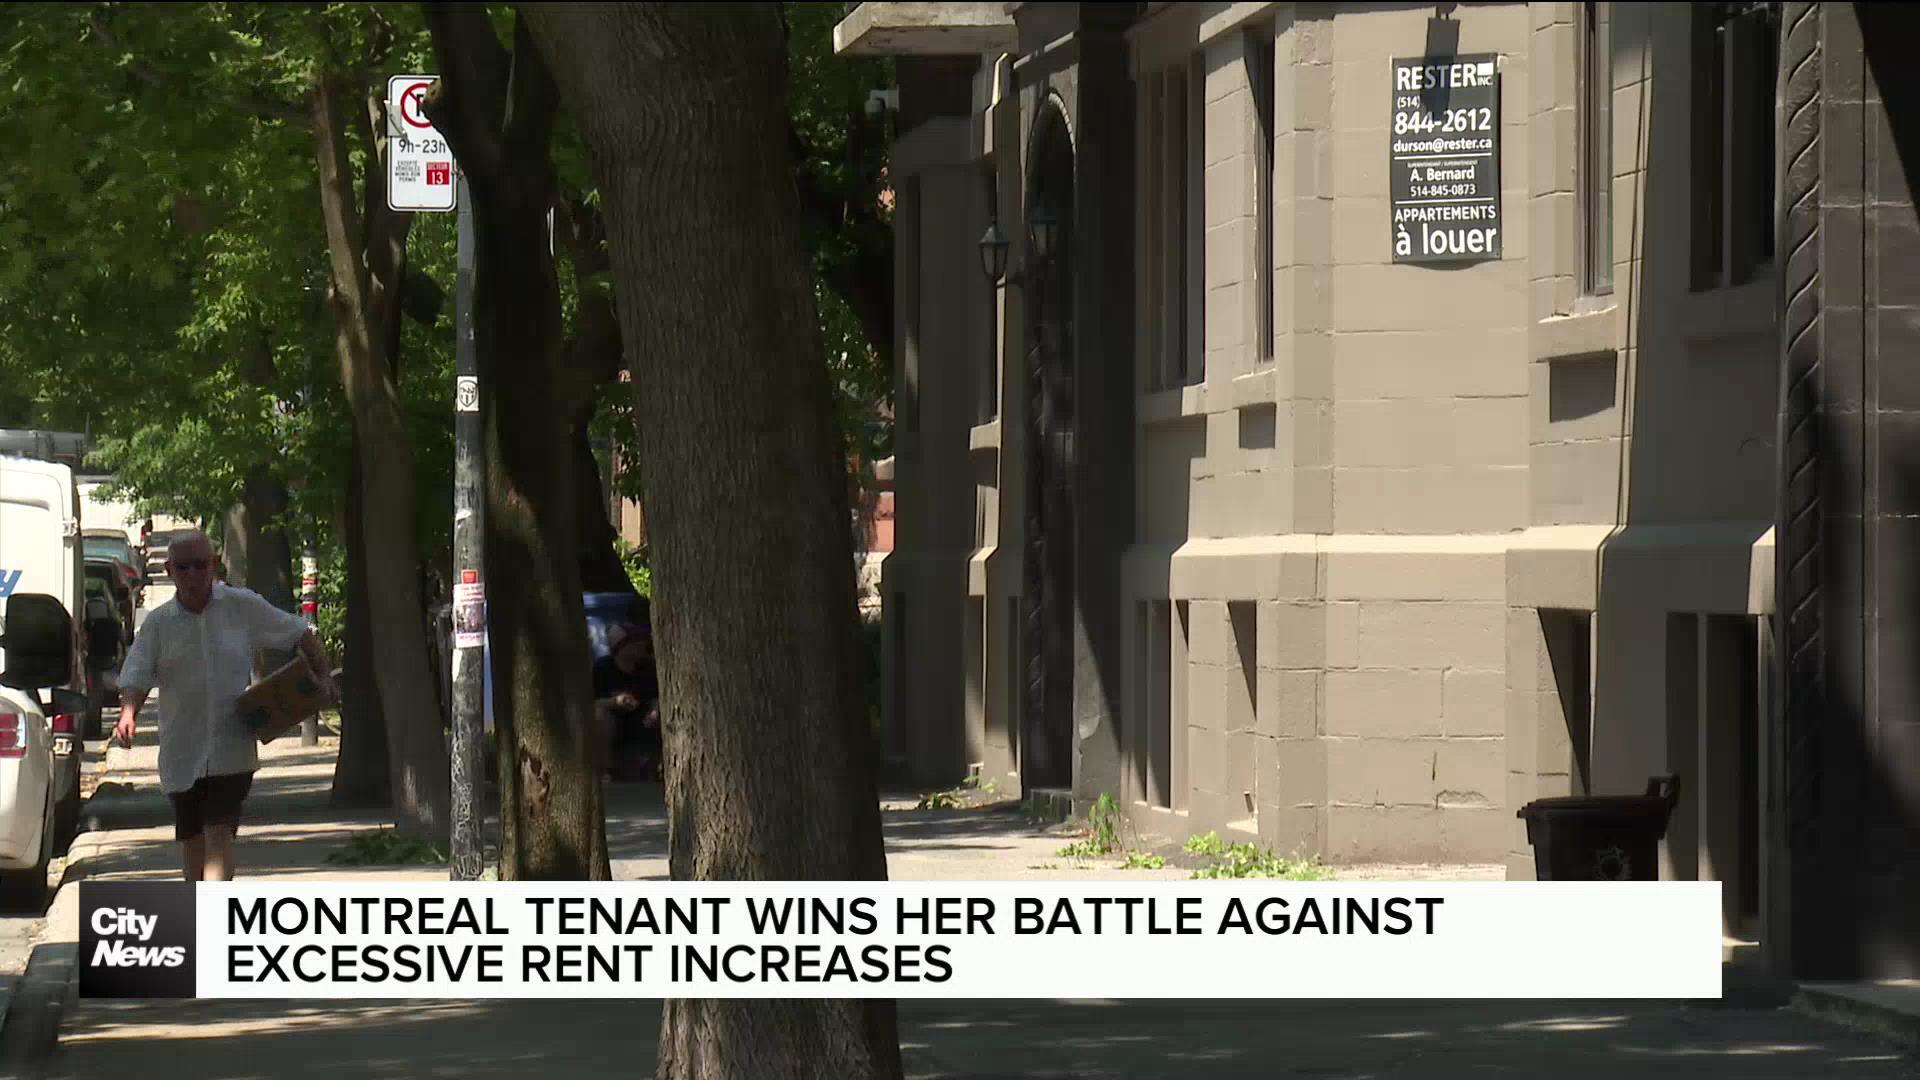 Montreal tenant wins battle against excessive rent increases